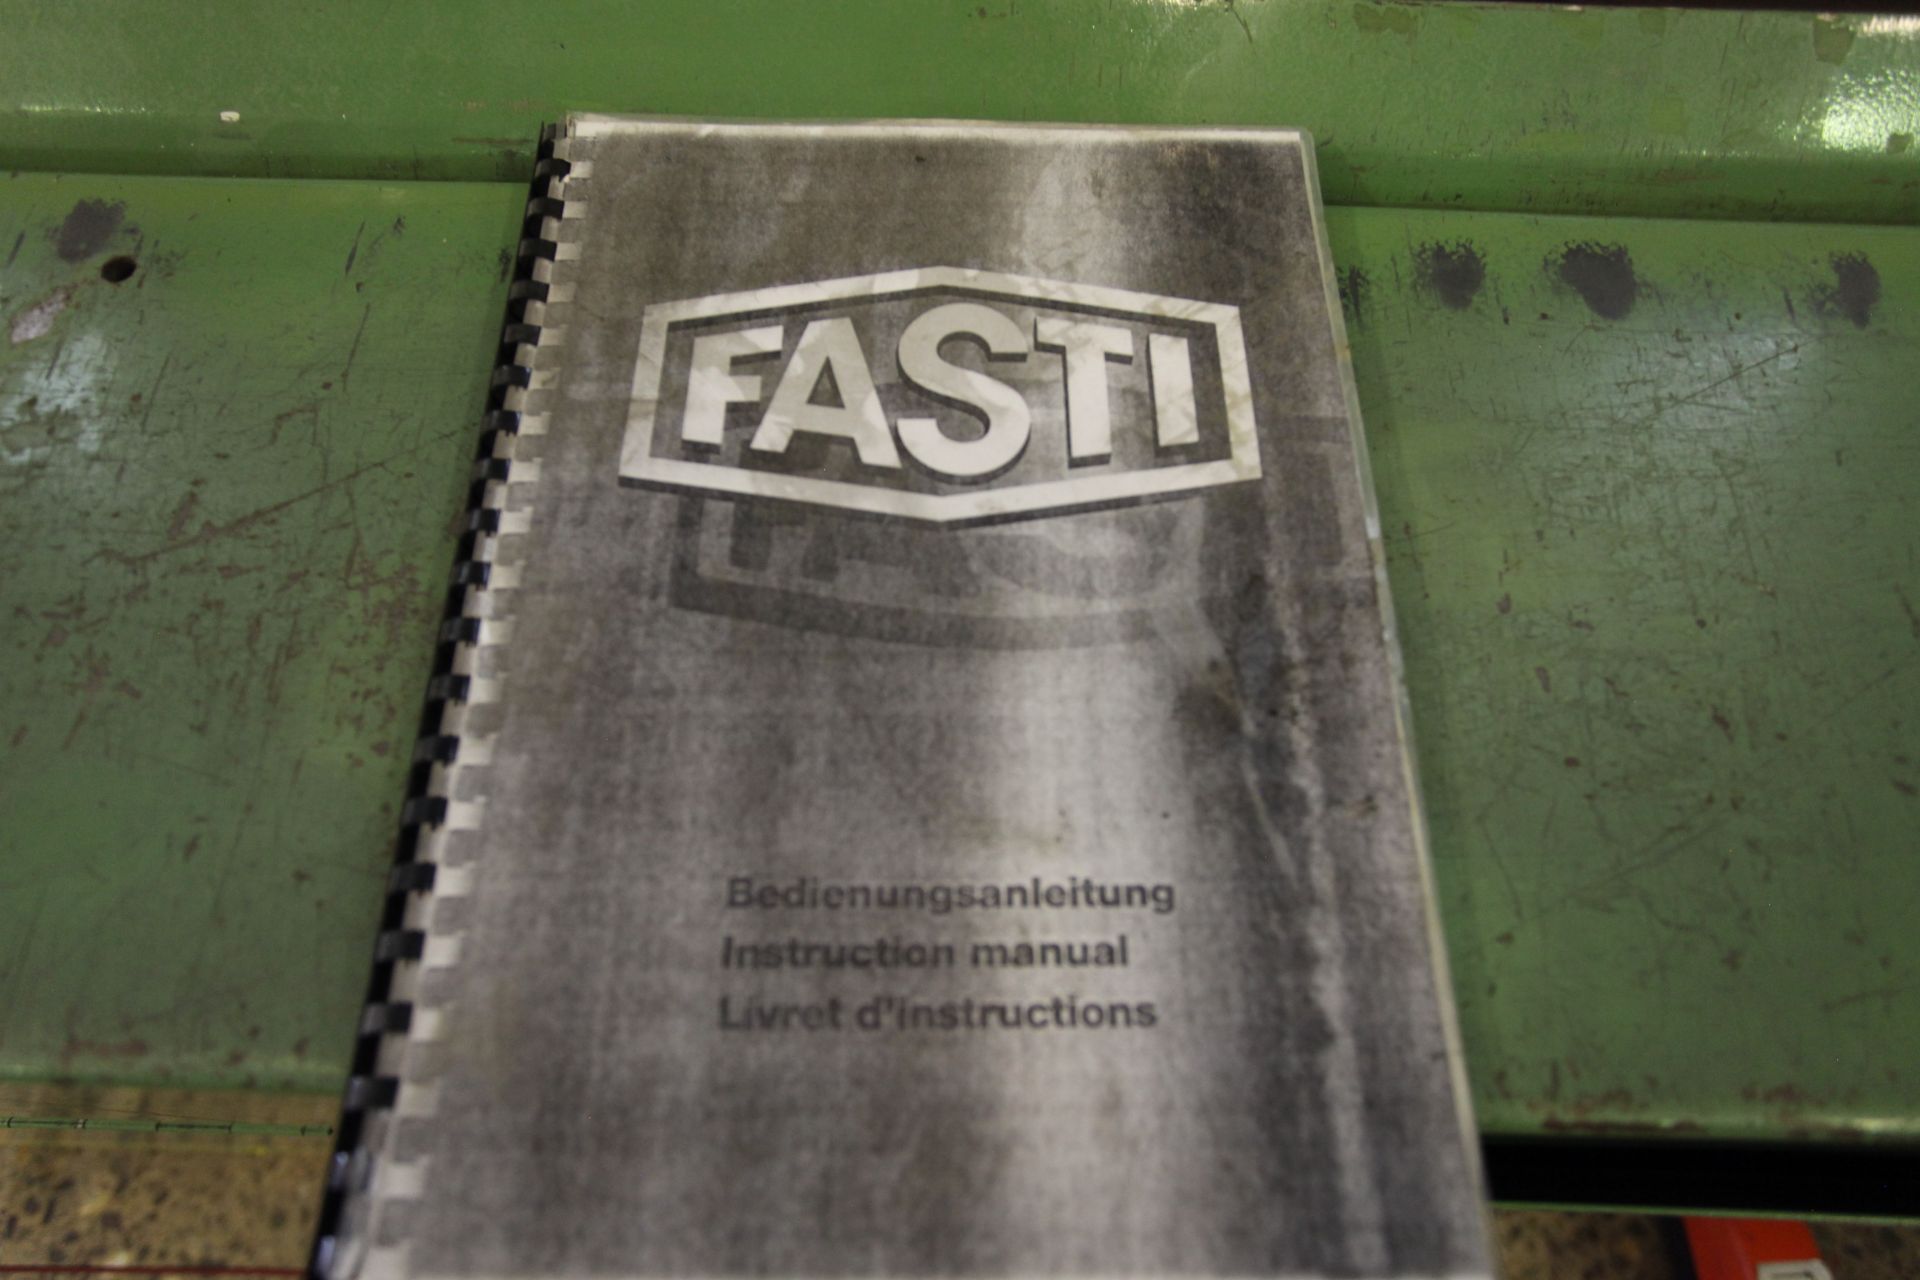 Fasti 1044-18-0.75 Reflector Bending Machine, serial no. 94144 002, dimensions approx. 280cm wide - Image 9 of 10